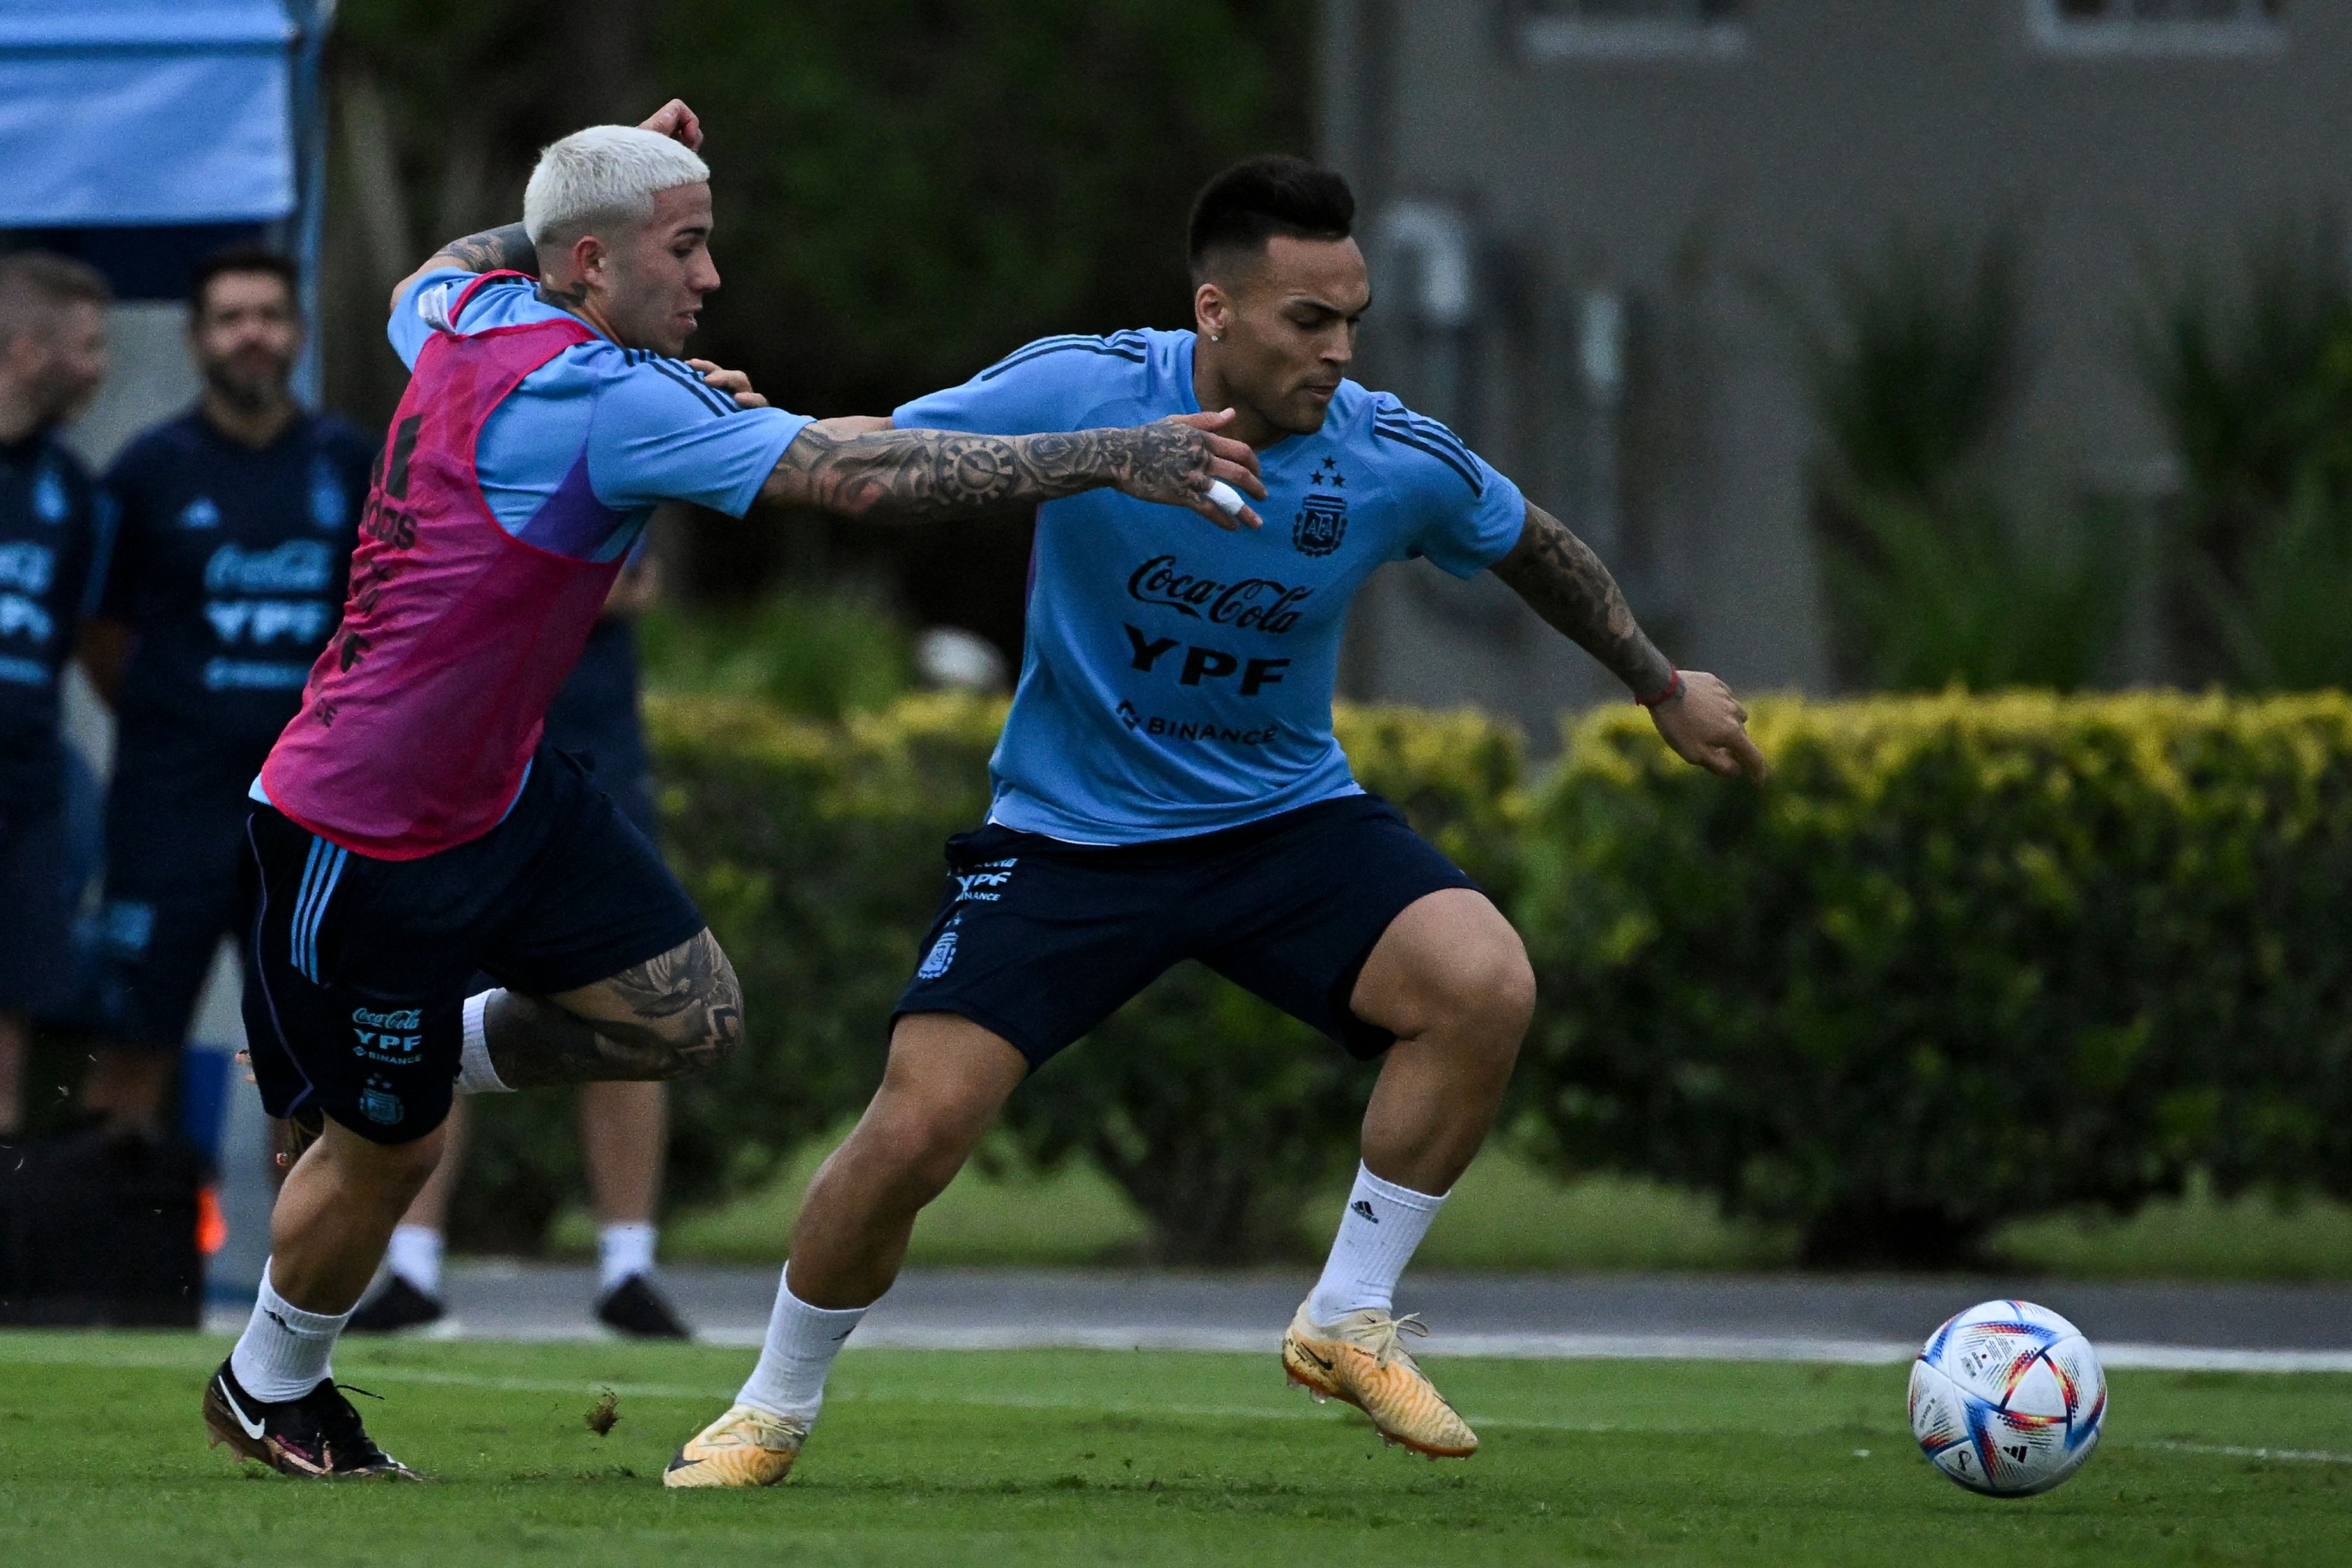 Argentina's midfielder Enzo Fernandez (L) vies for the ball with his teammate forward Lautaro Martinez (R) during a training session in Ezeiza, Buenos Aires province, on March 22, 2023, ahead of the friendly football matches against Panama and Curazao. (Photo by Luis ROBAYO / AFP)